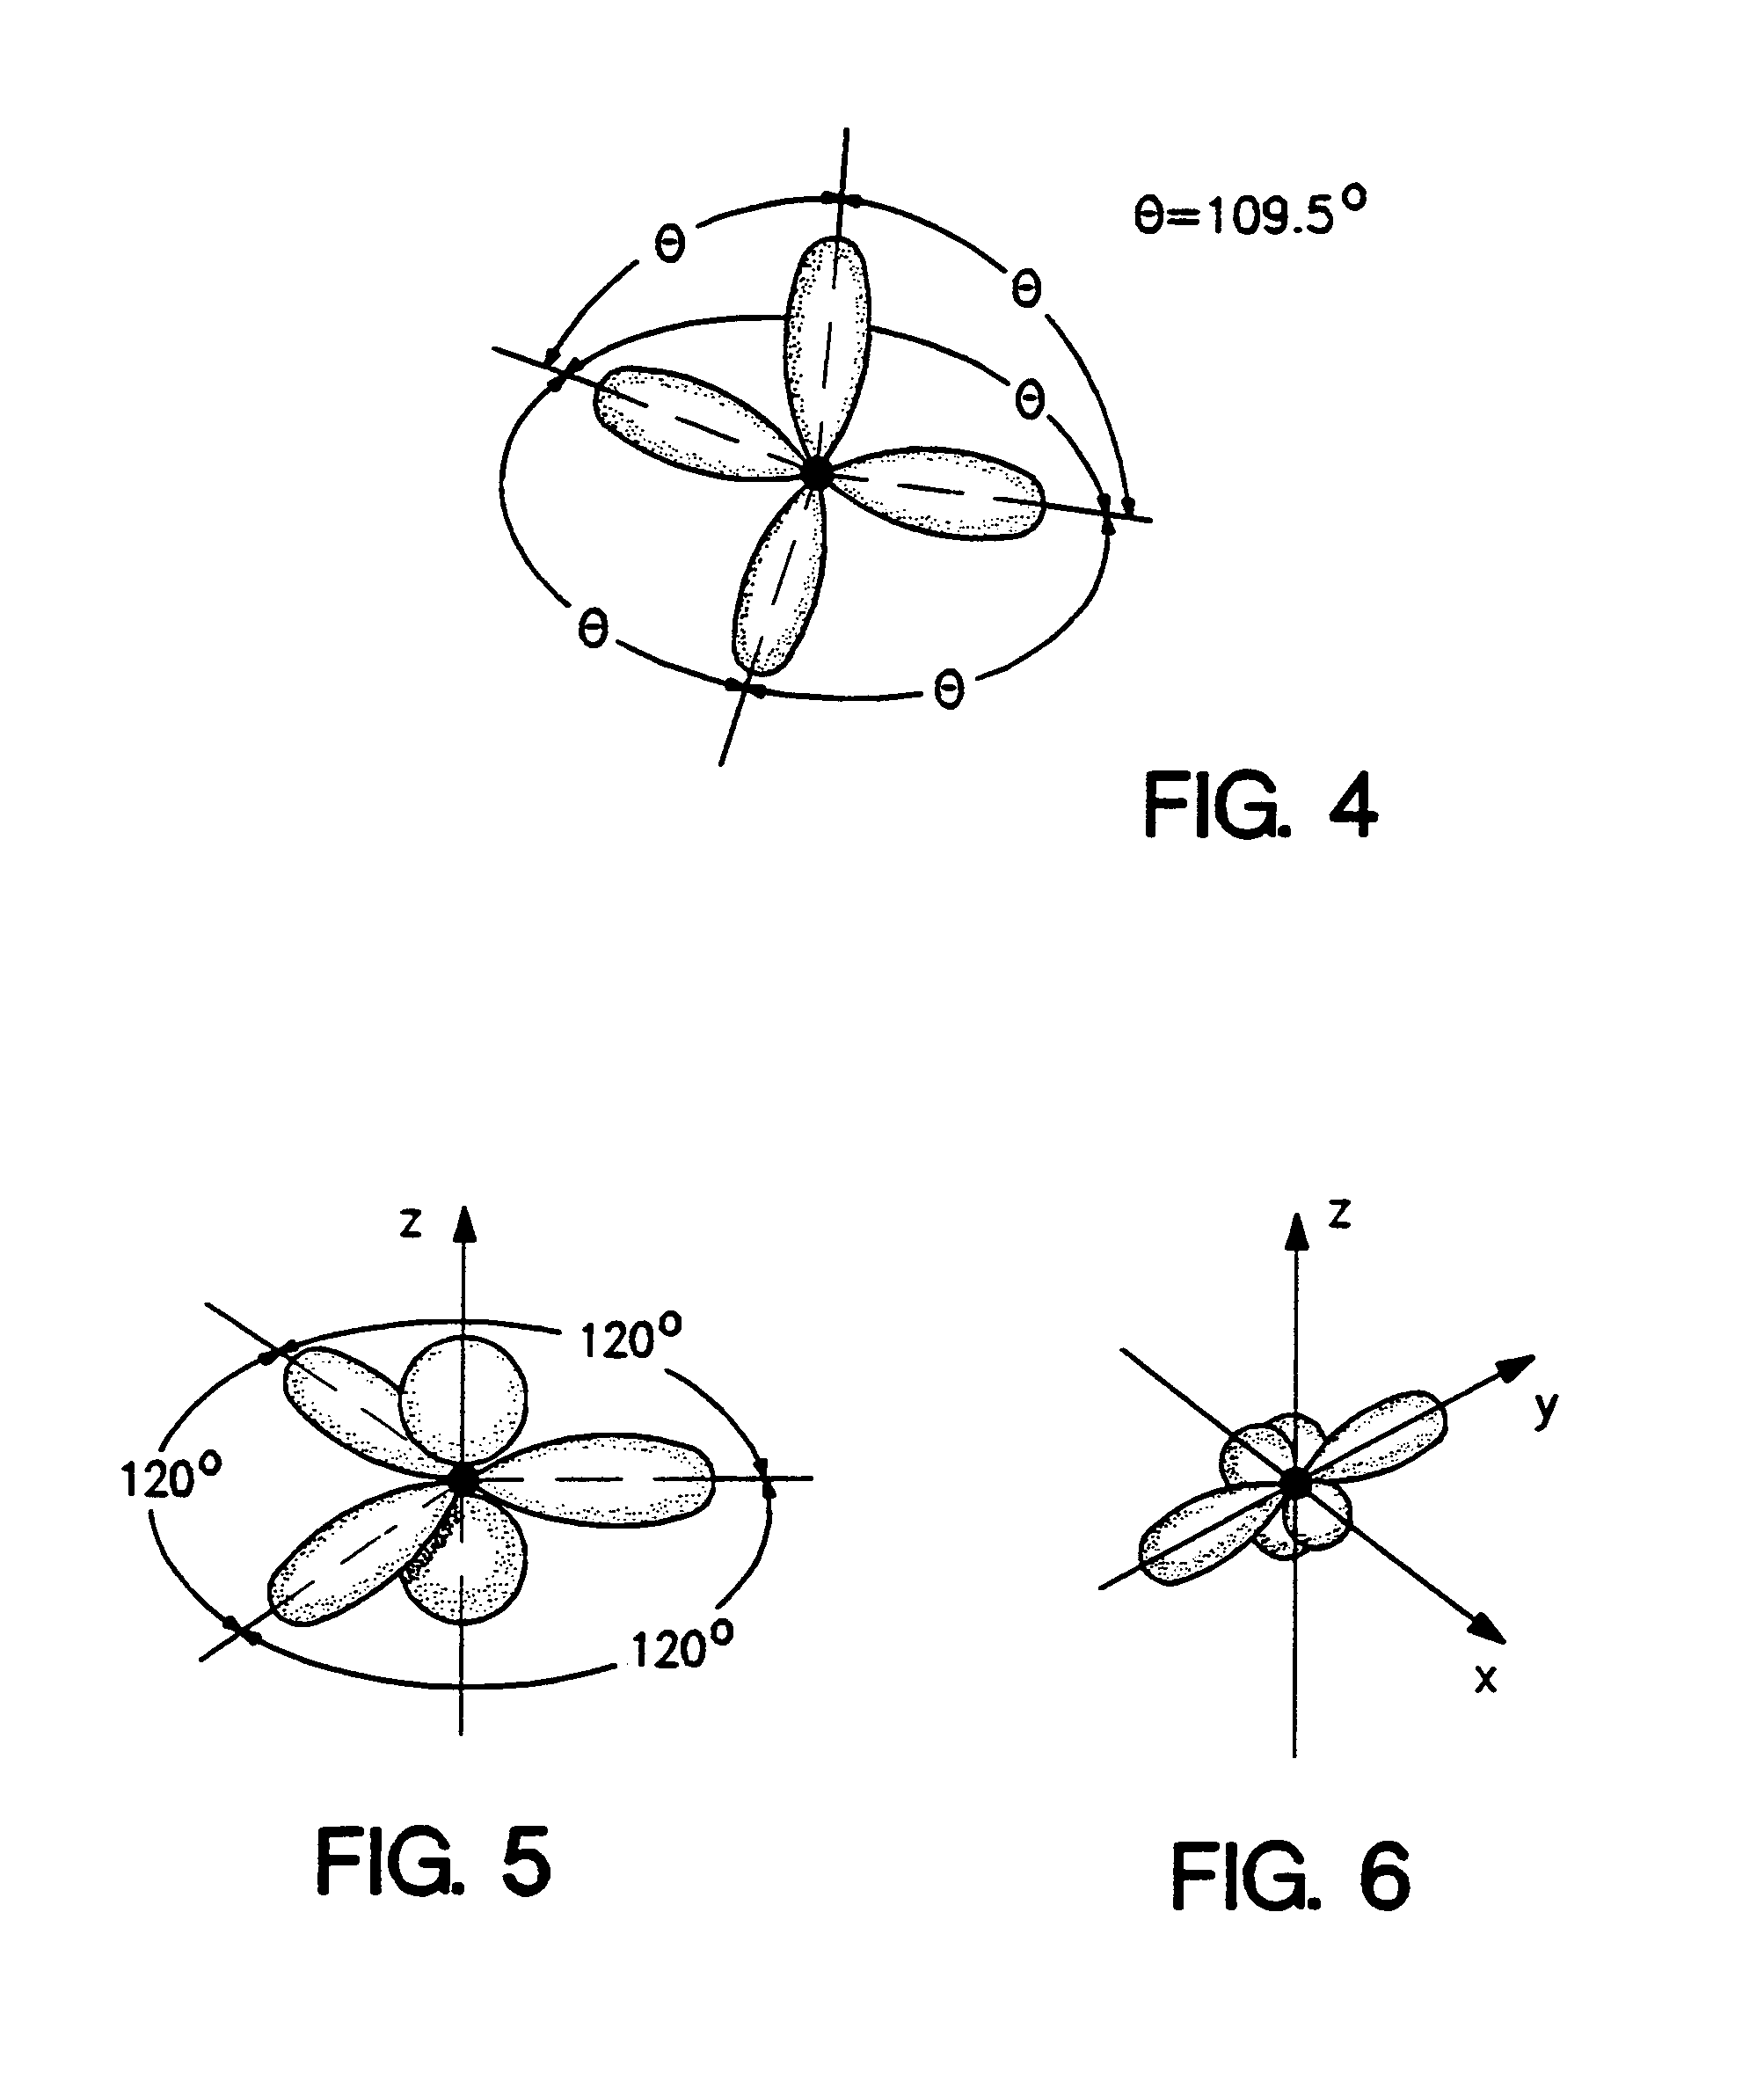 Method of making heat treatable coated article with diamond-like carbon (DLC) inclusive layer